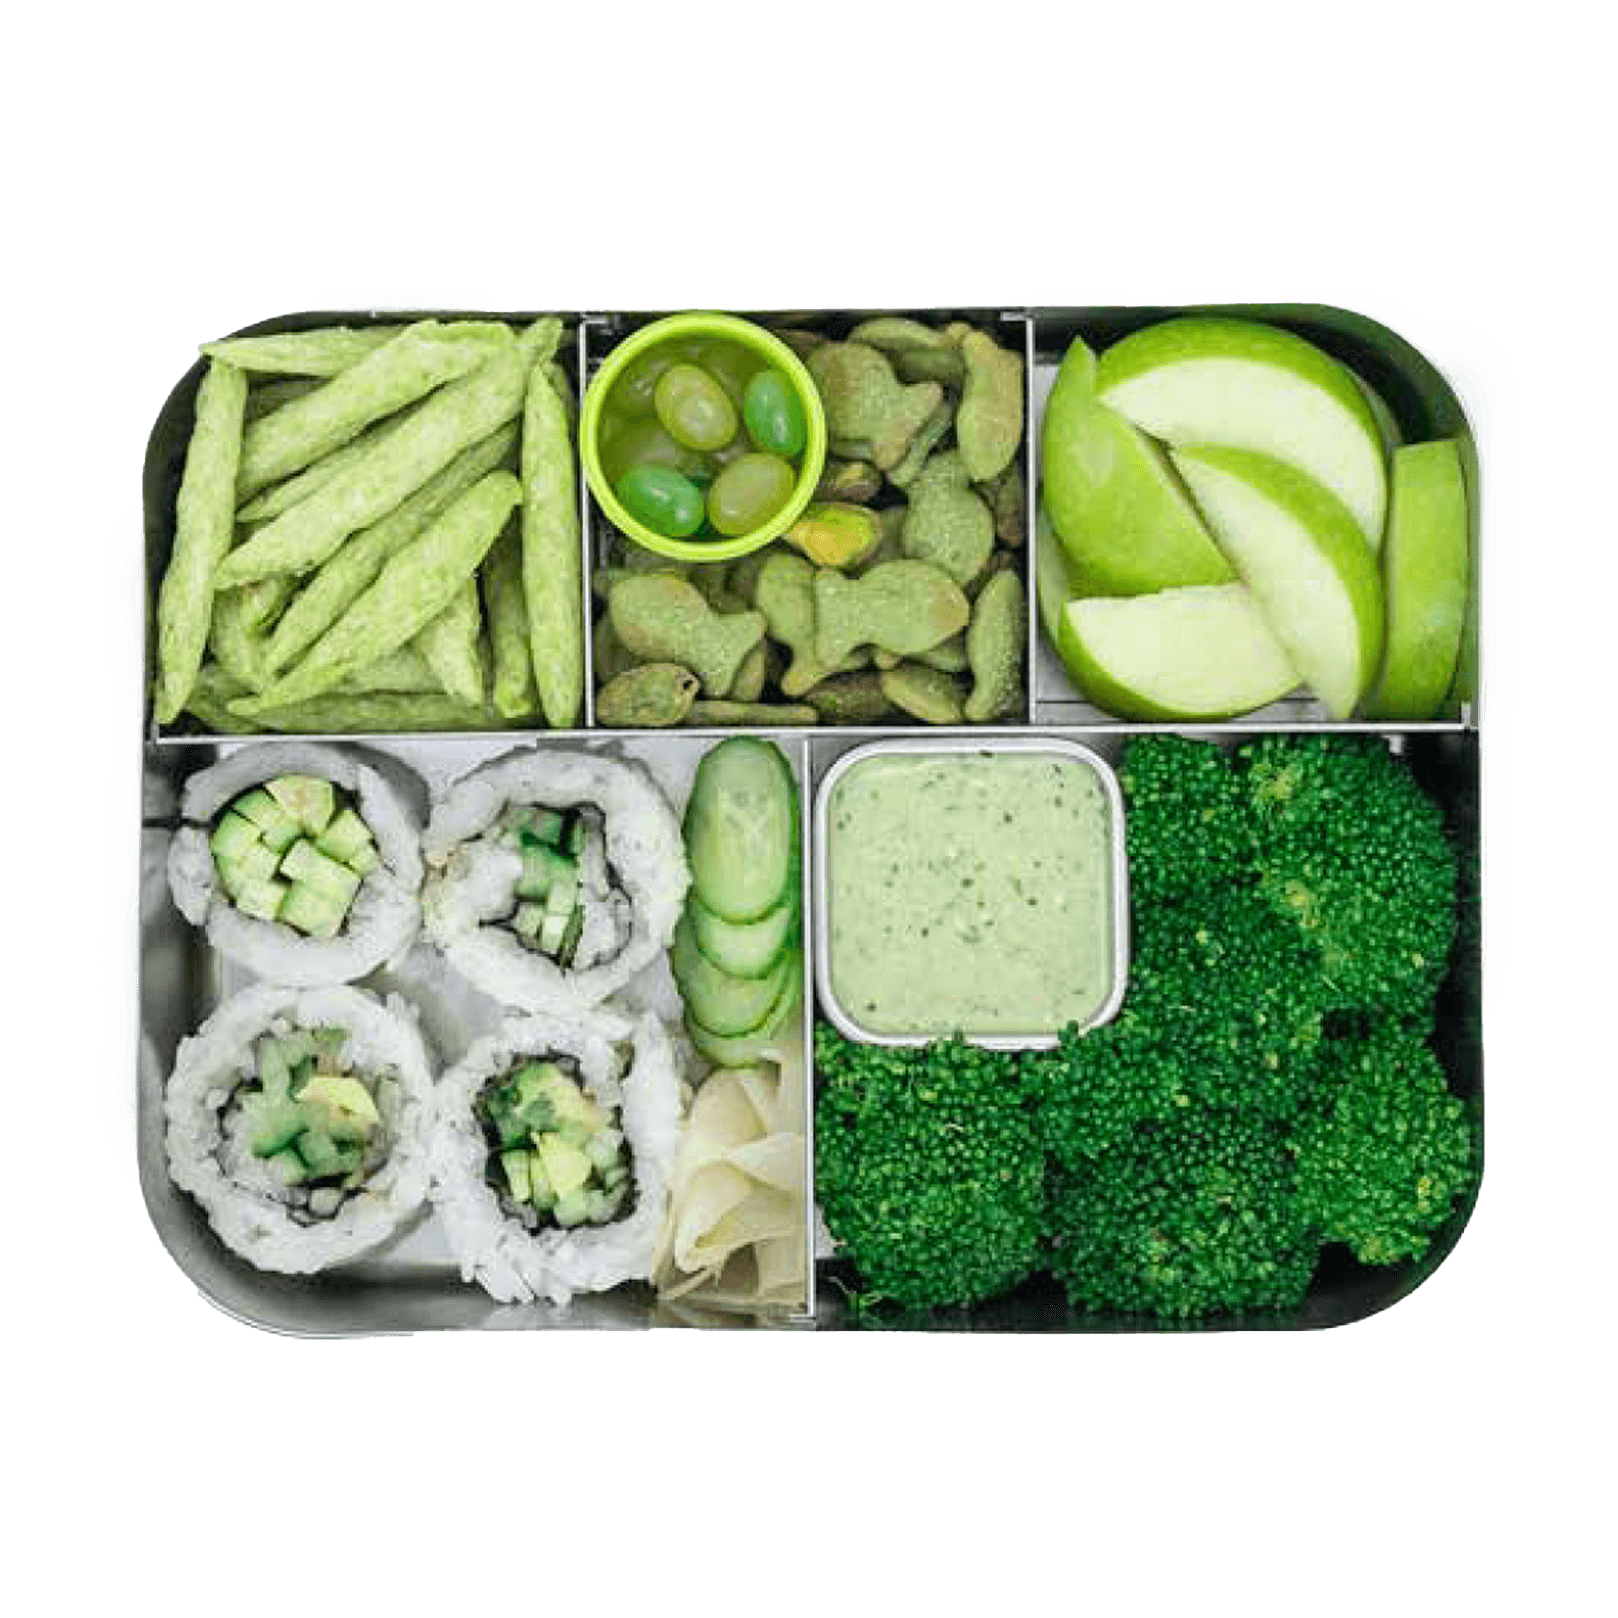 25 Genius Bento Box Lunch Ideas for Your Kids — Eat This Not That